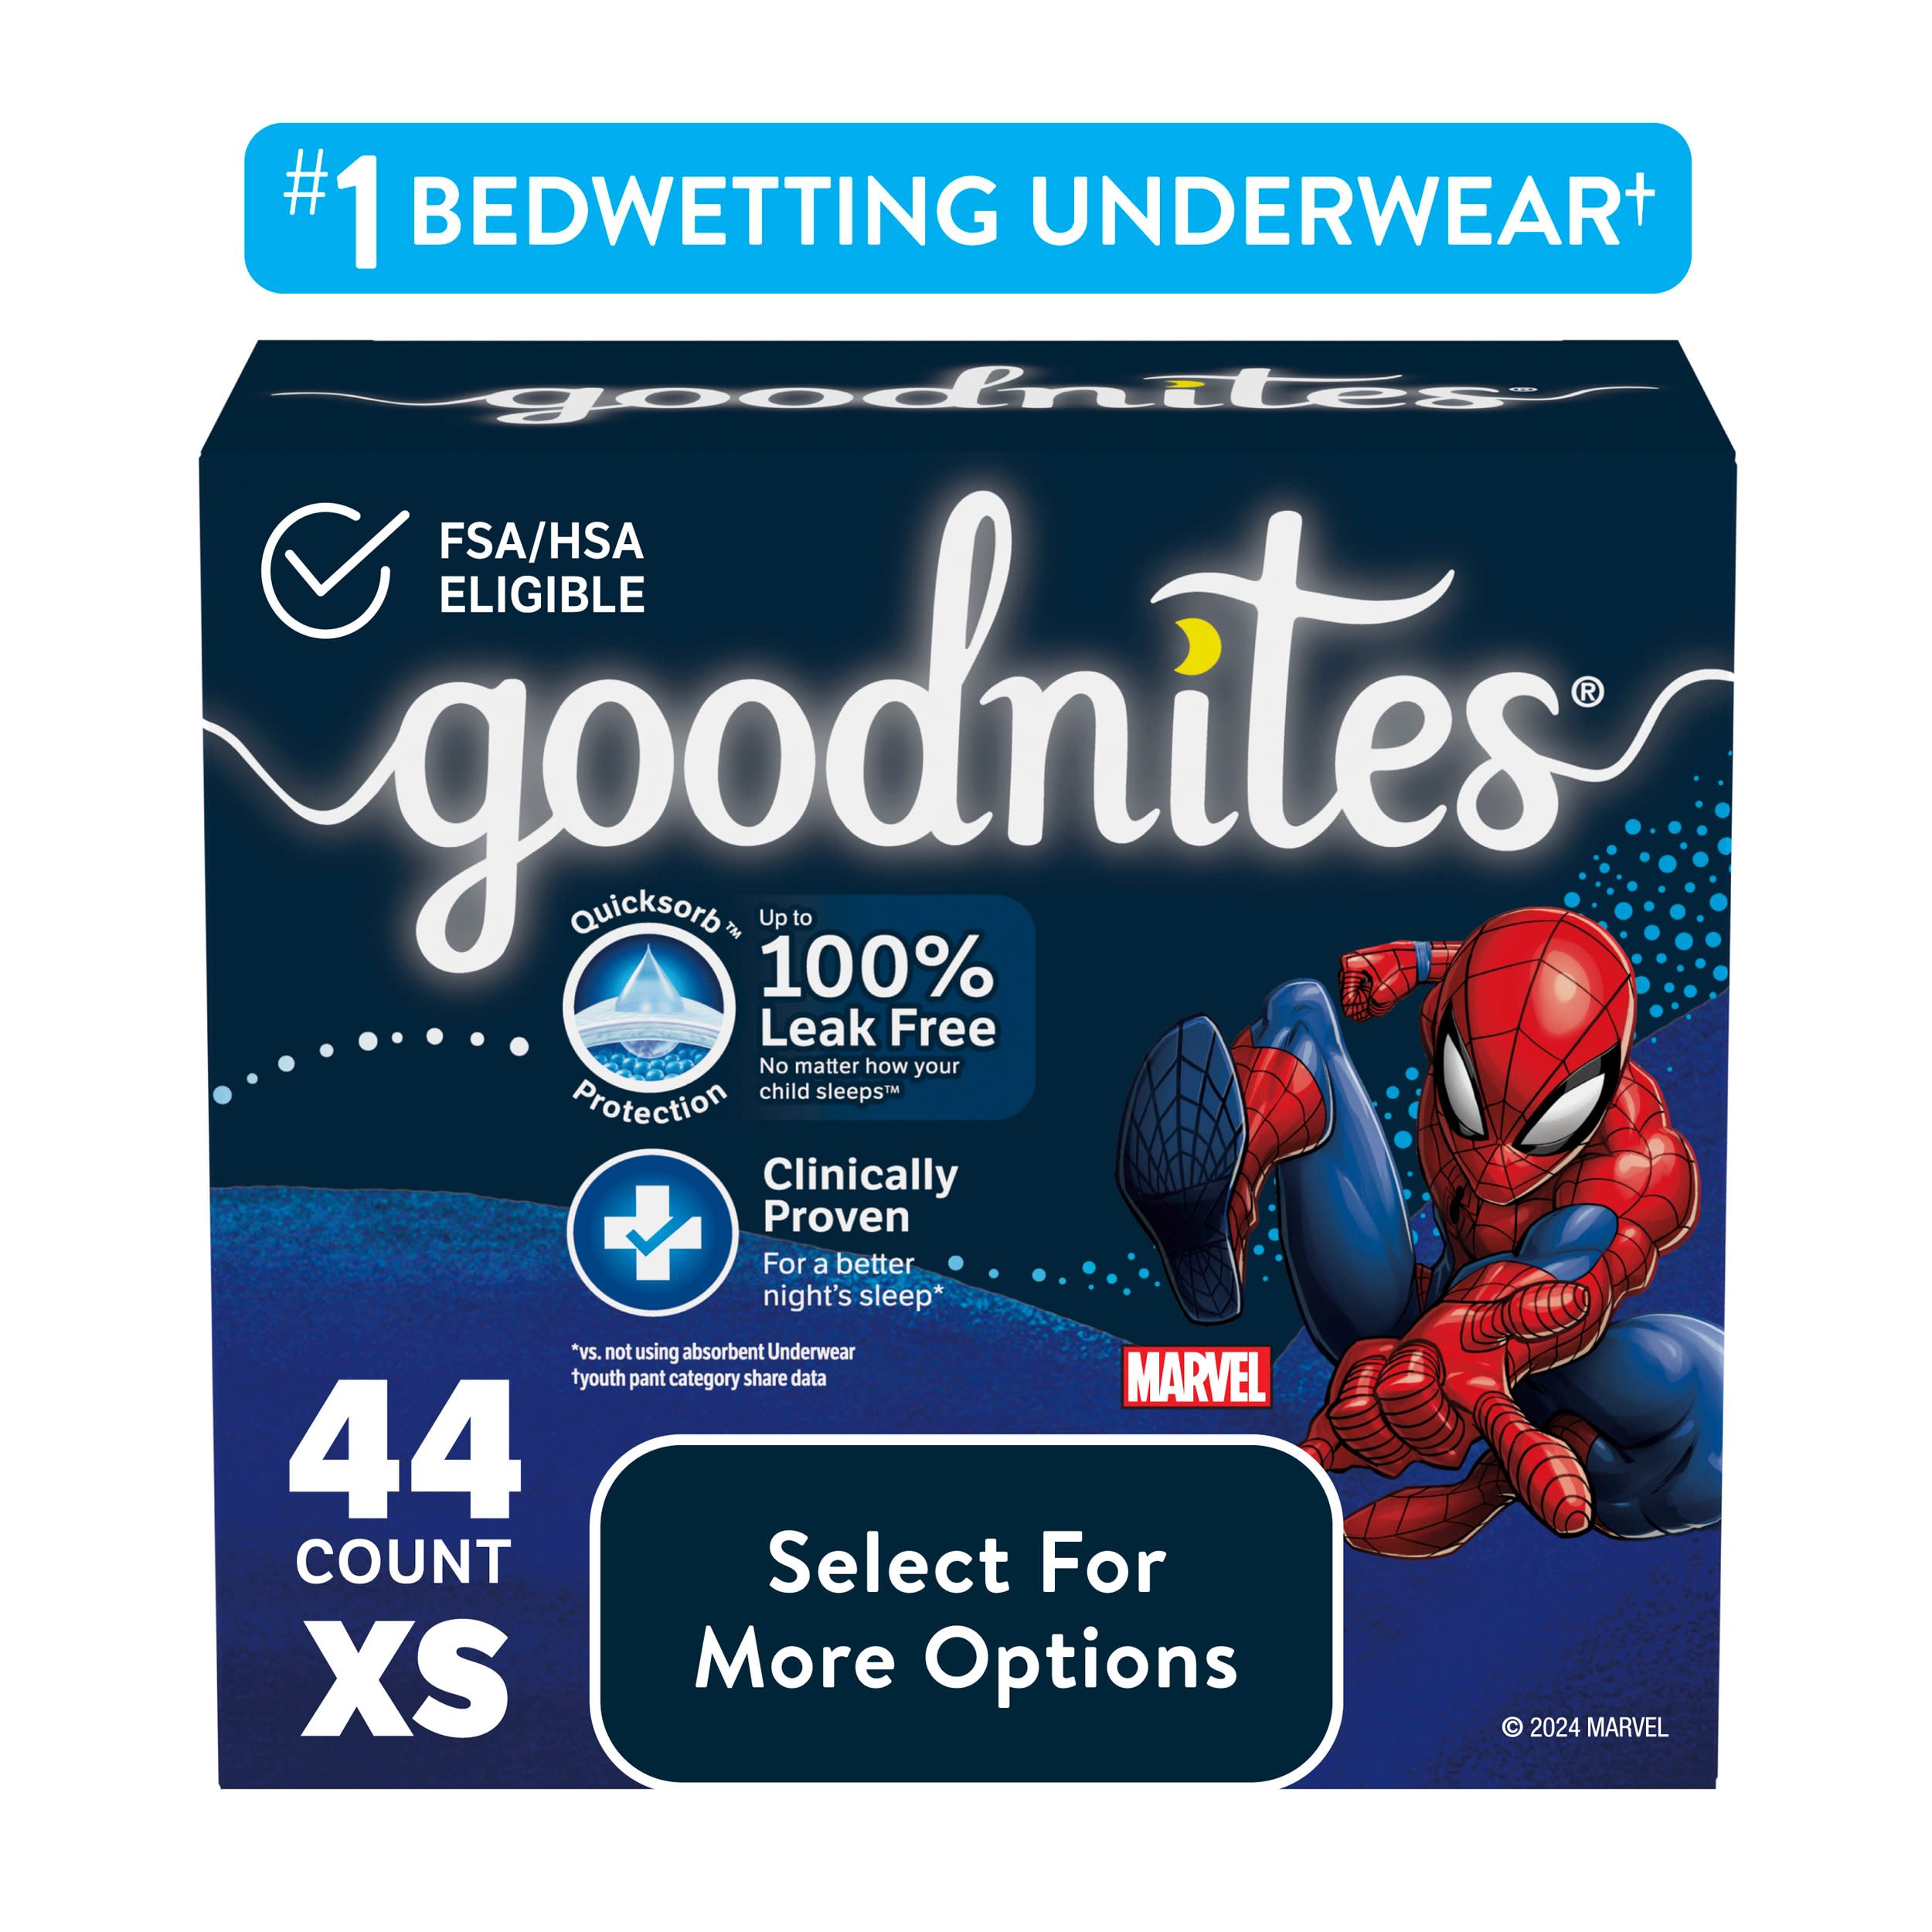 Goodnites Nighttime Bedwetting Underwear for Boys, XS, 44 Ct (Select for More Options) - image 1 of 10